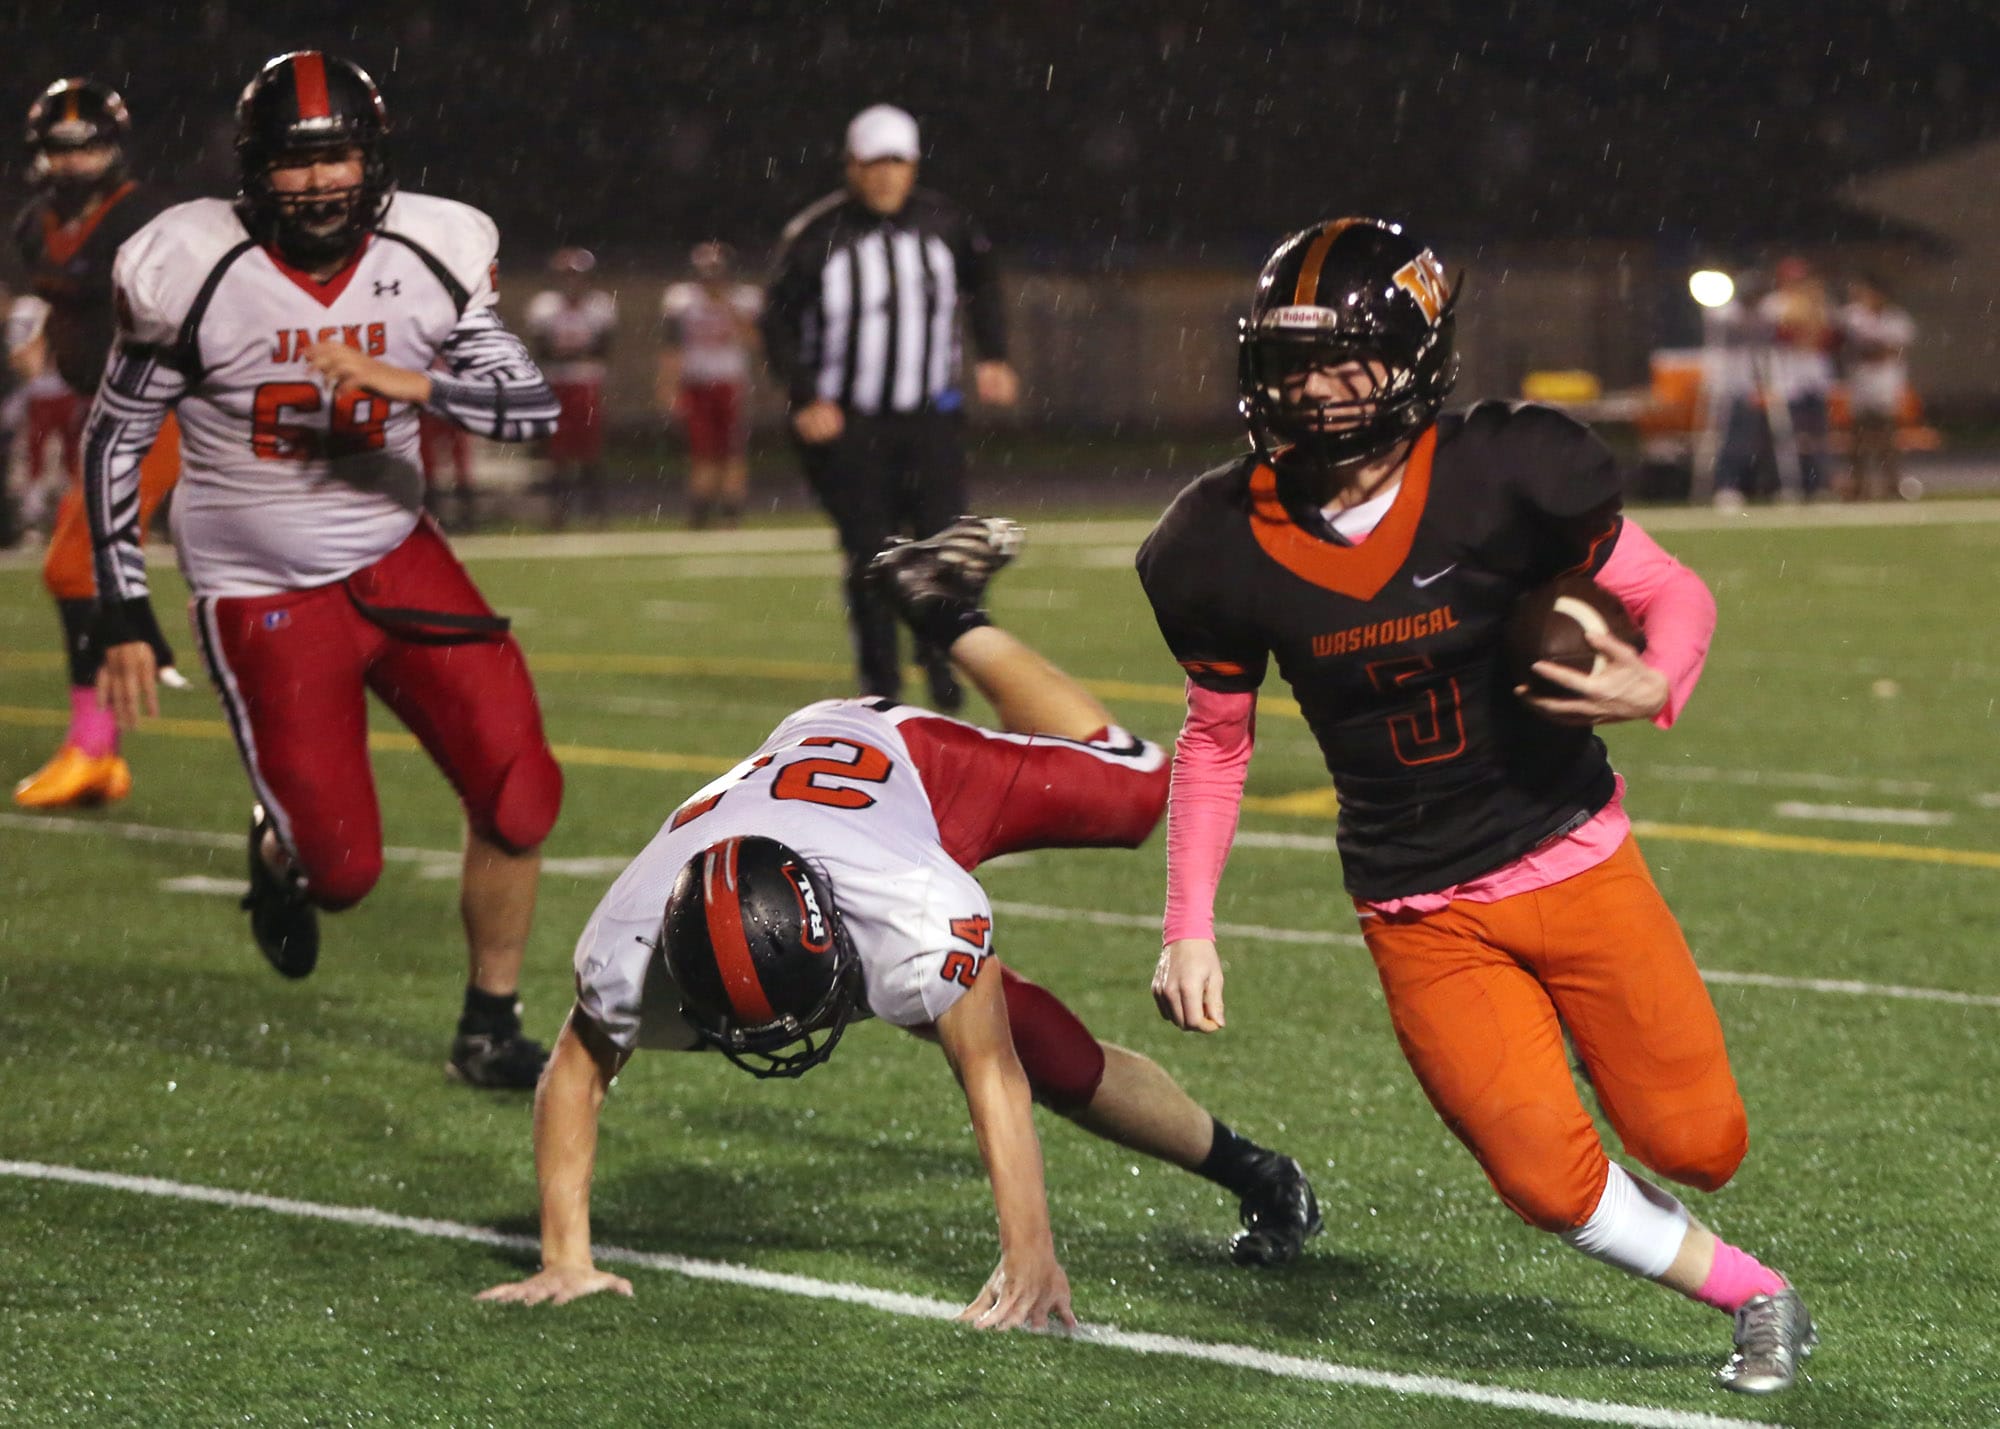 Washougal Panther Kade Coons runs with the ball as he is pursued by RA Long Lumberjacks Parker reeves (C) and Keoni Mawae (L)  at Washougal Friday October 21, 2016.